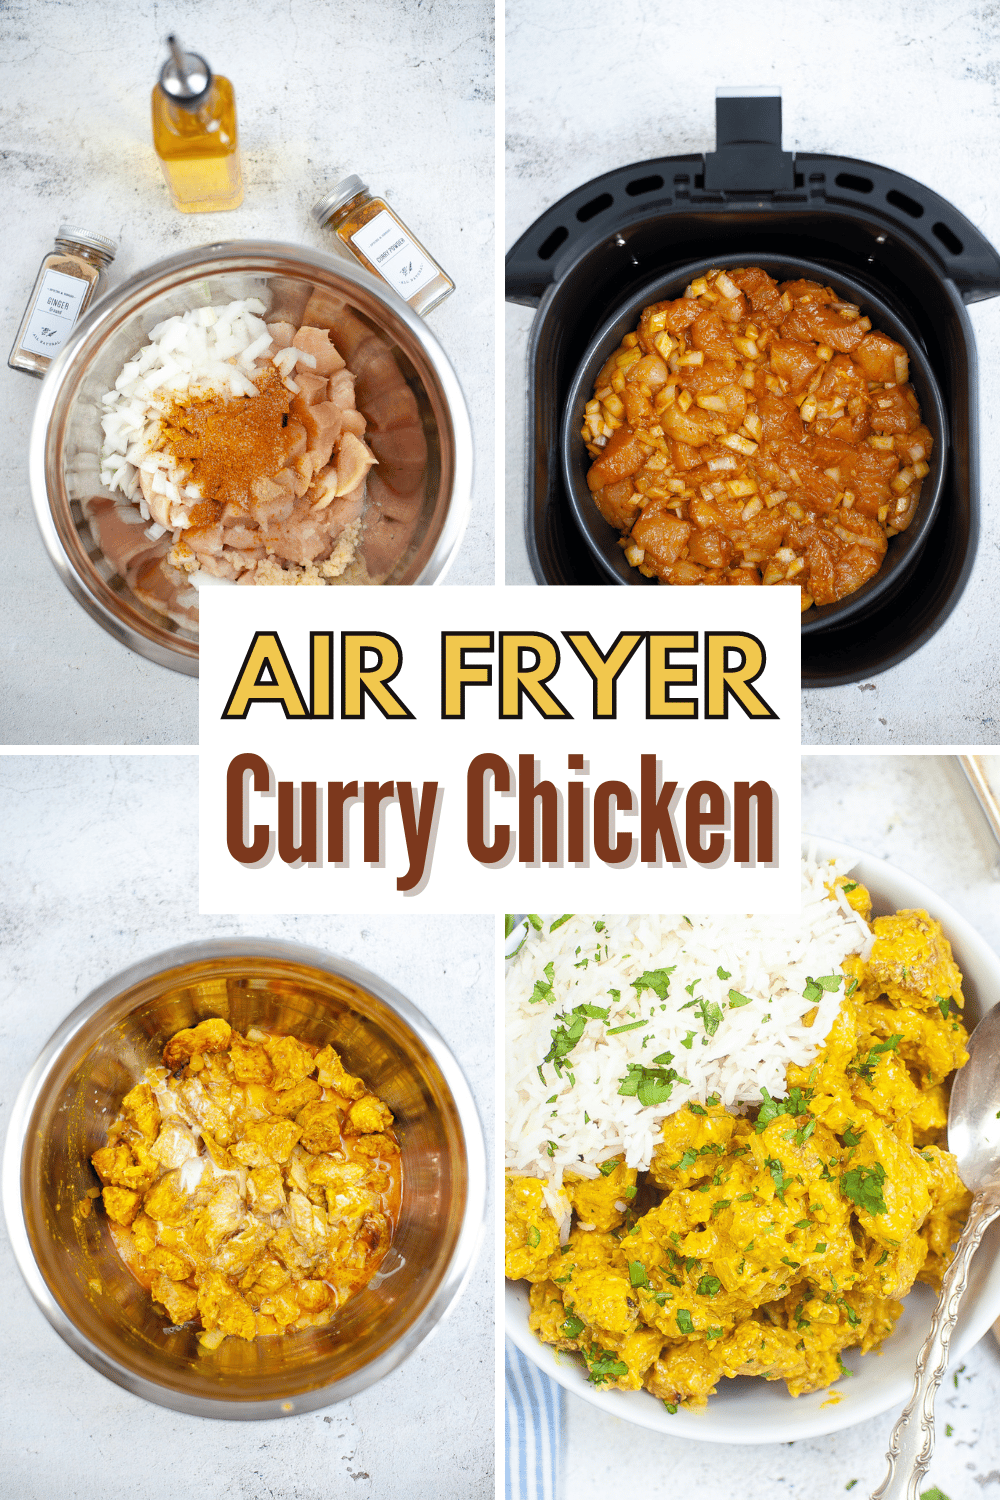 This Air Fryer Curry Chicken is a quick and easy way to get your curry fix! This recipe is a great way to enjoy a takeout favorite at home. #airfryer #currychicken #curry #chicken via @wondermomwannab